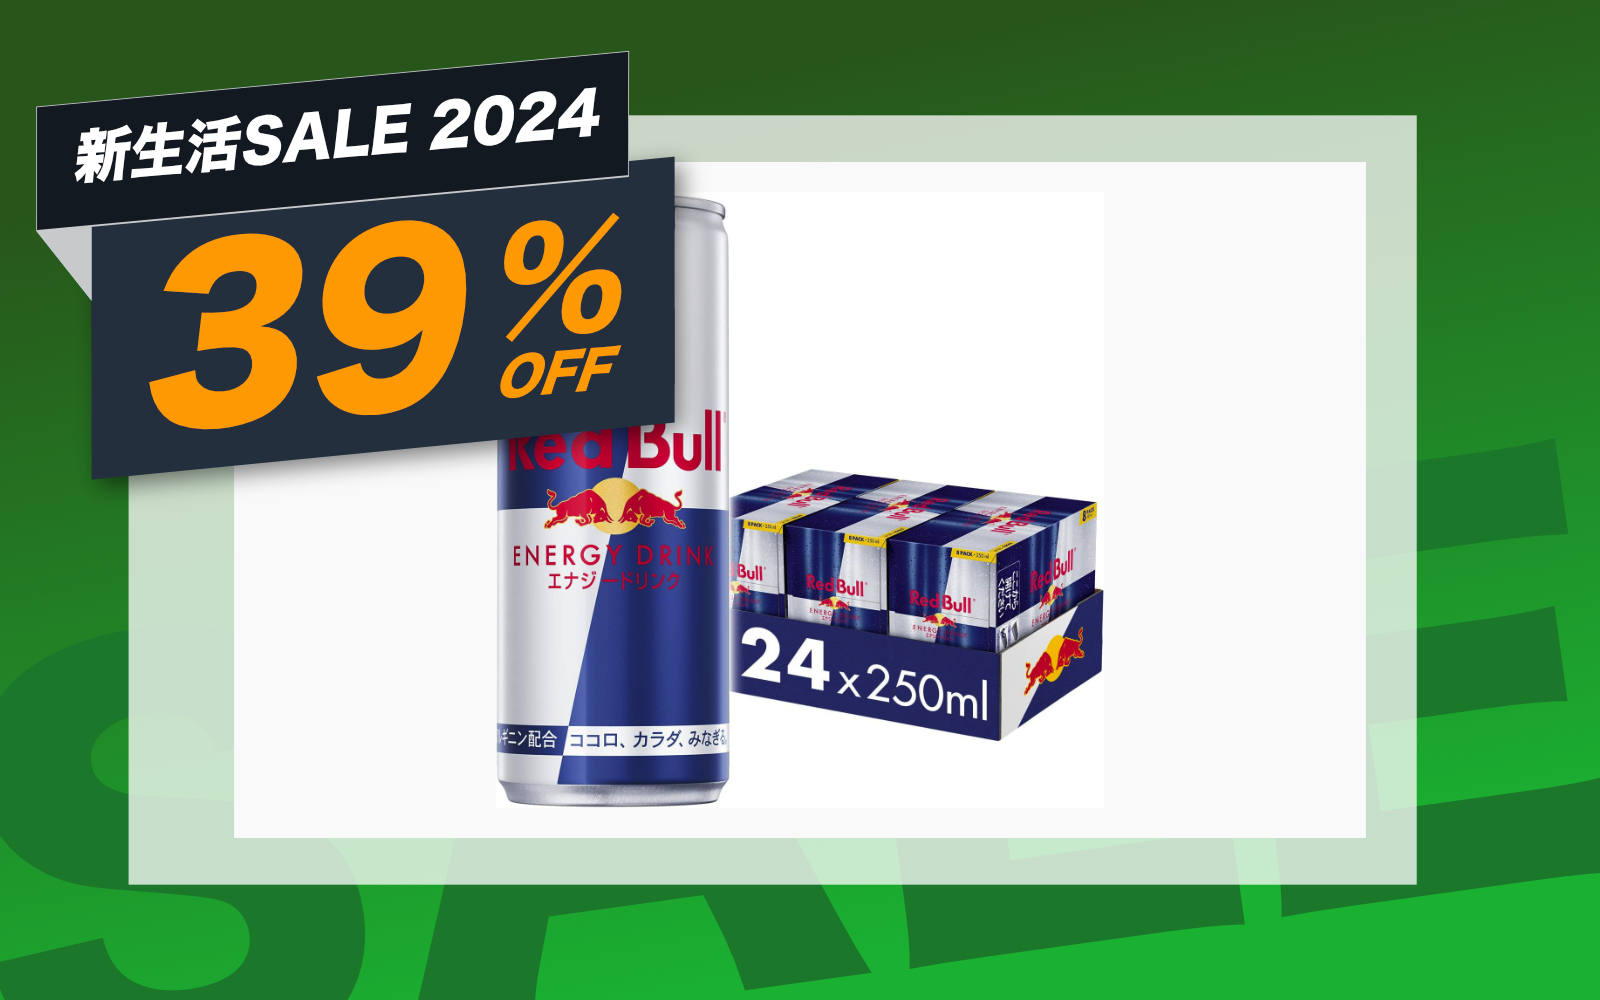 RED Bull is on sale right now